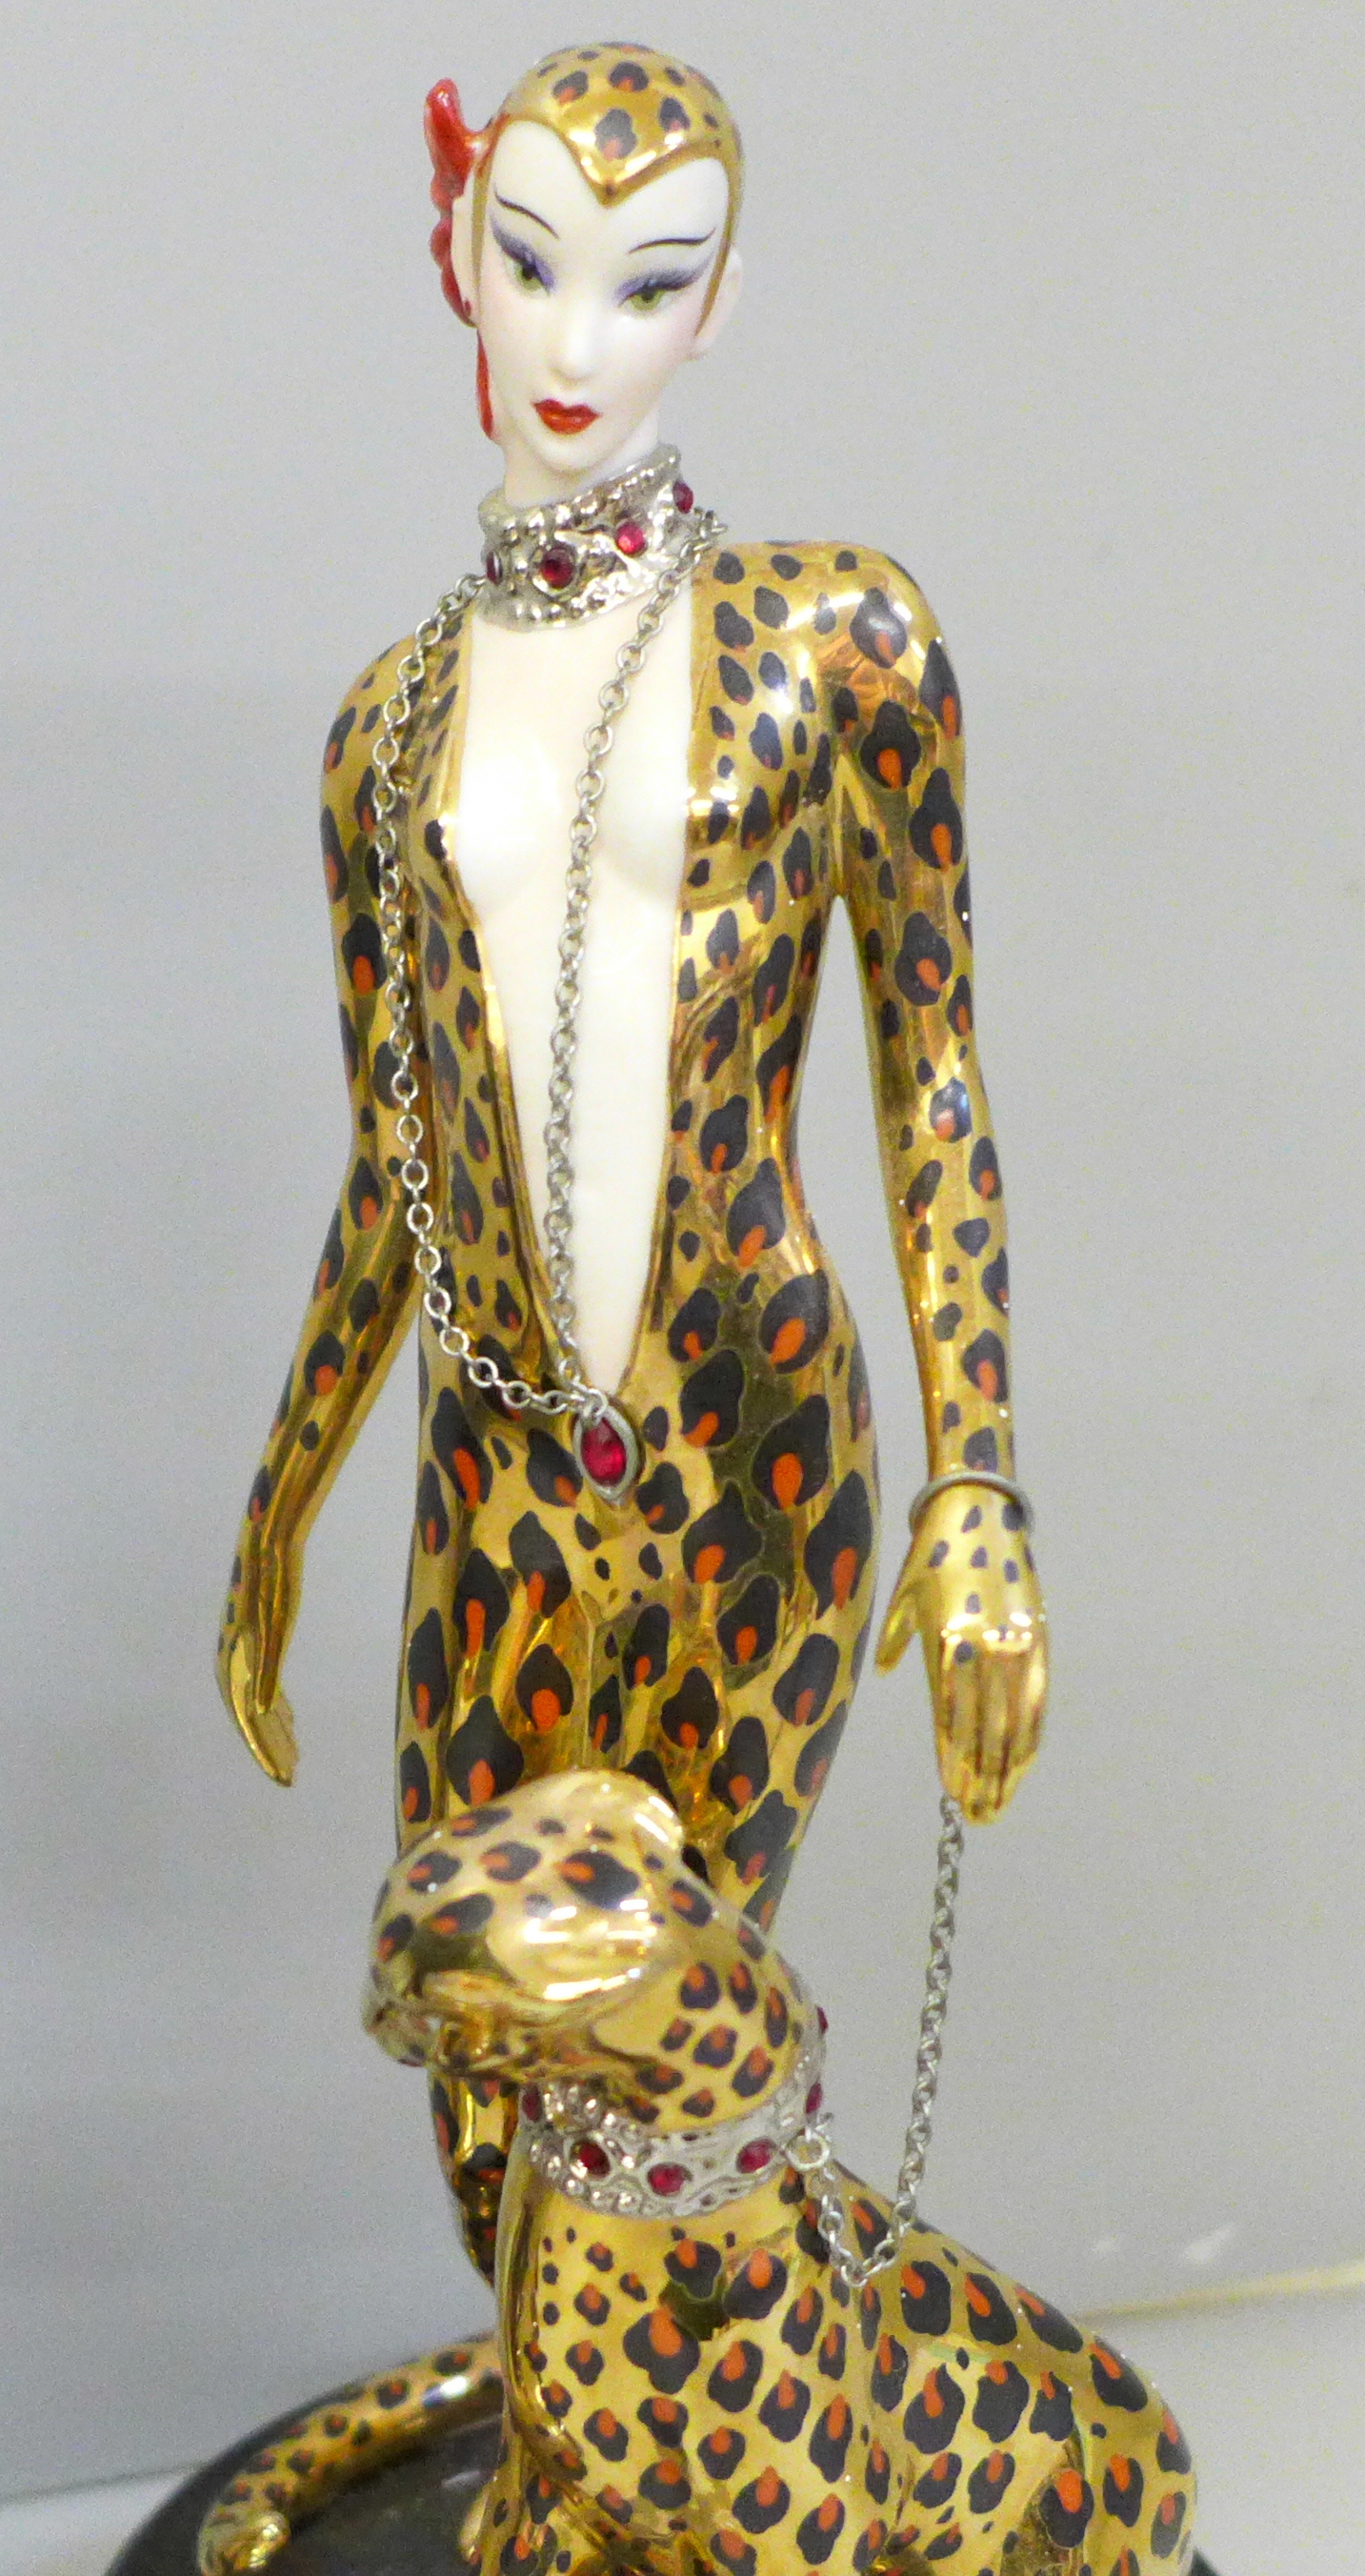 Three House of Erte figures, all limited edition, Isis, Symphone in Black and Leopard - Image 4 of 7